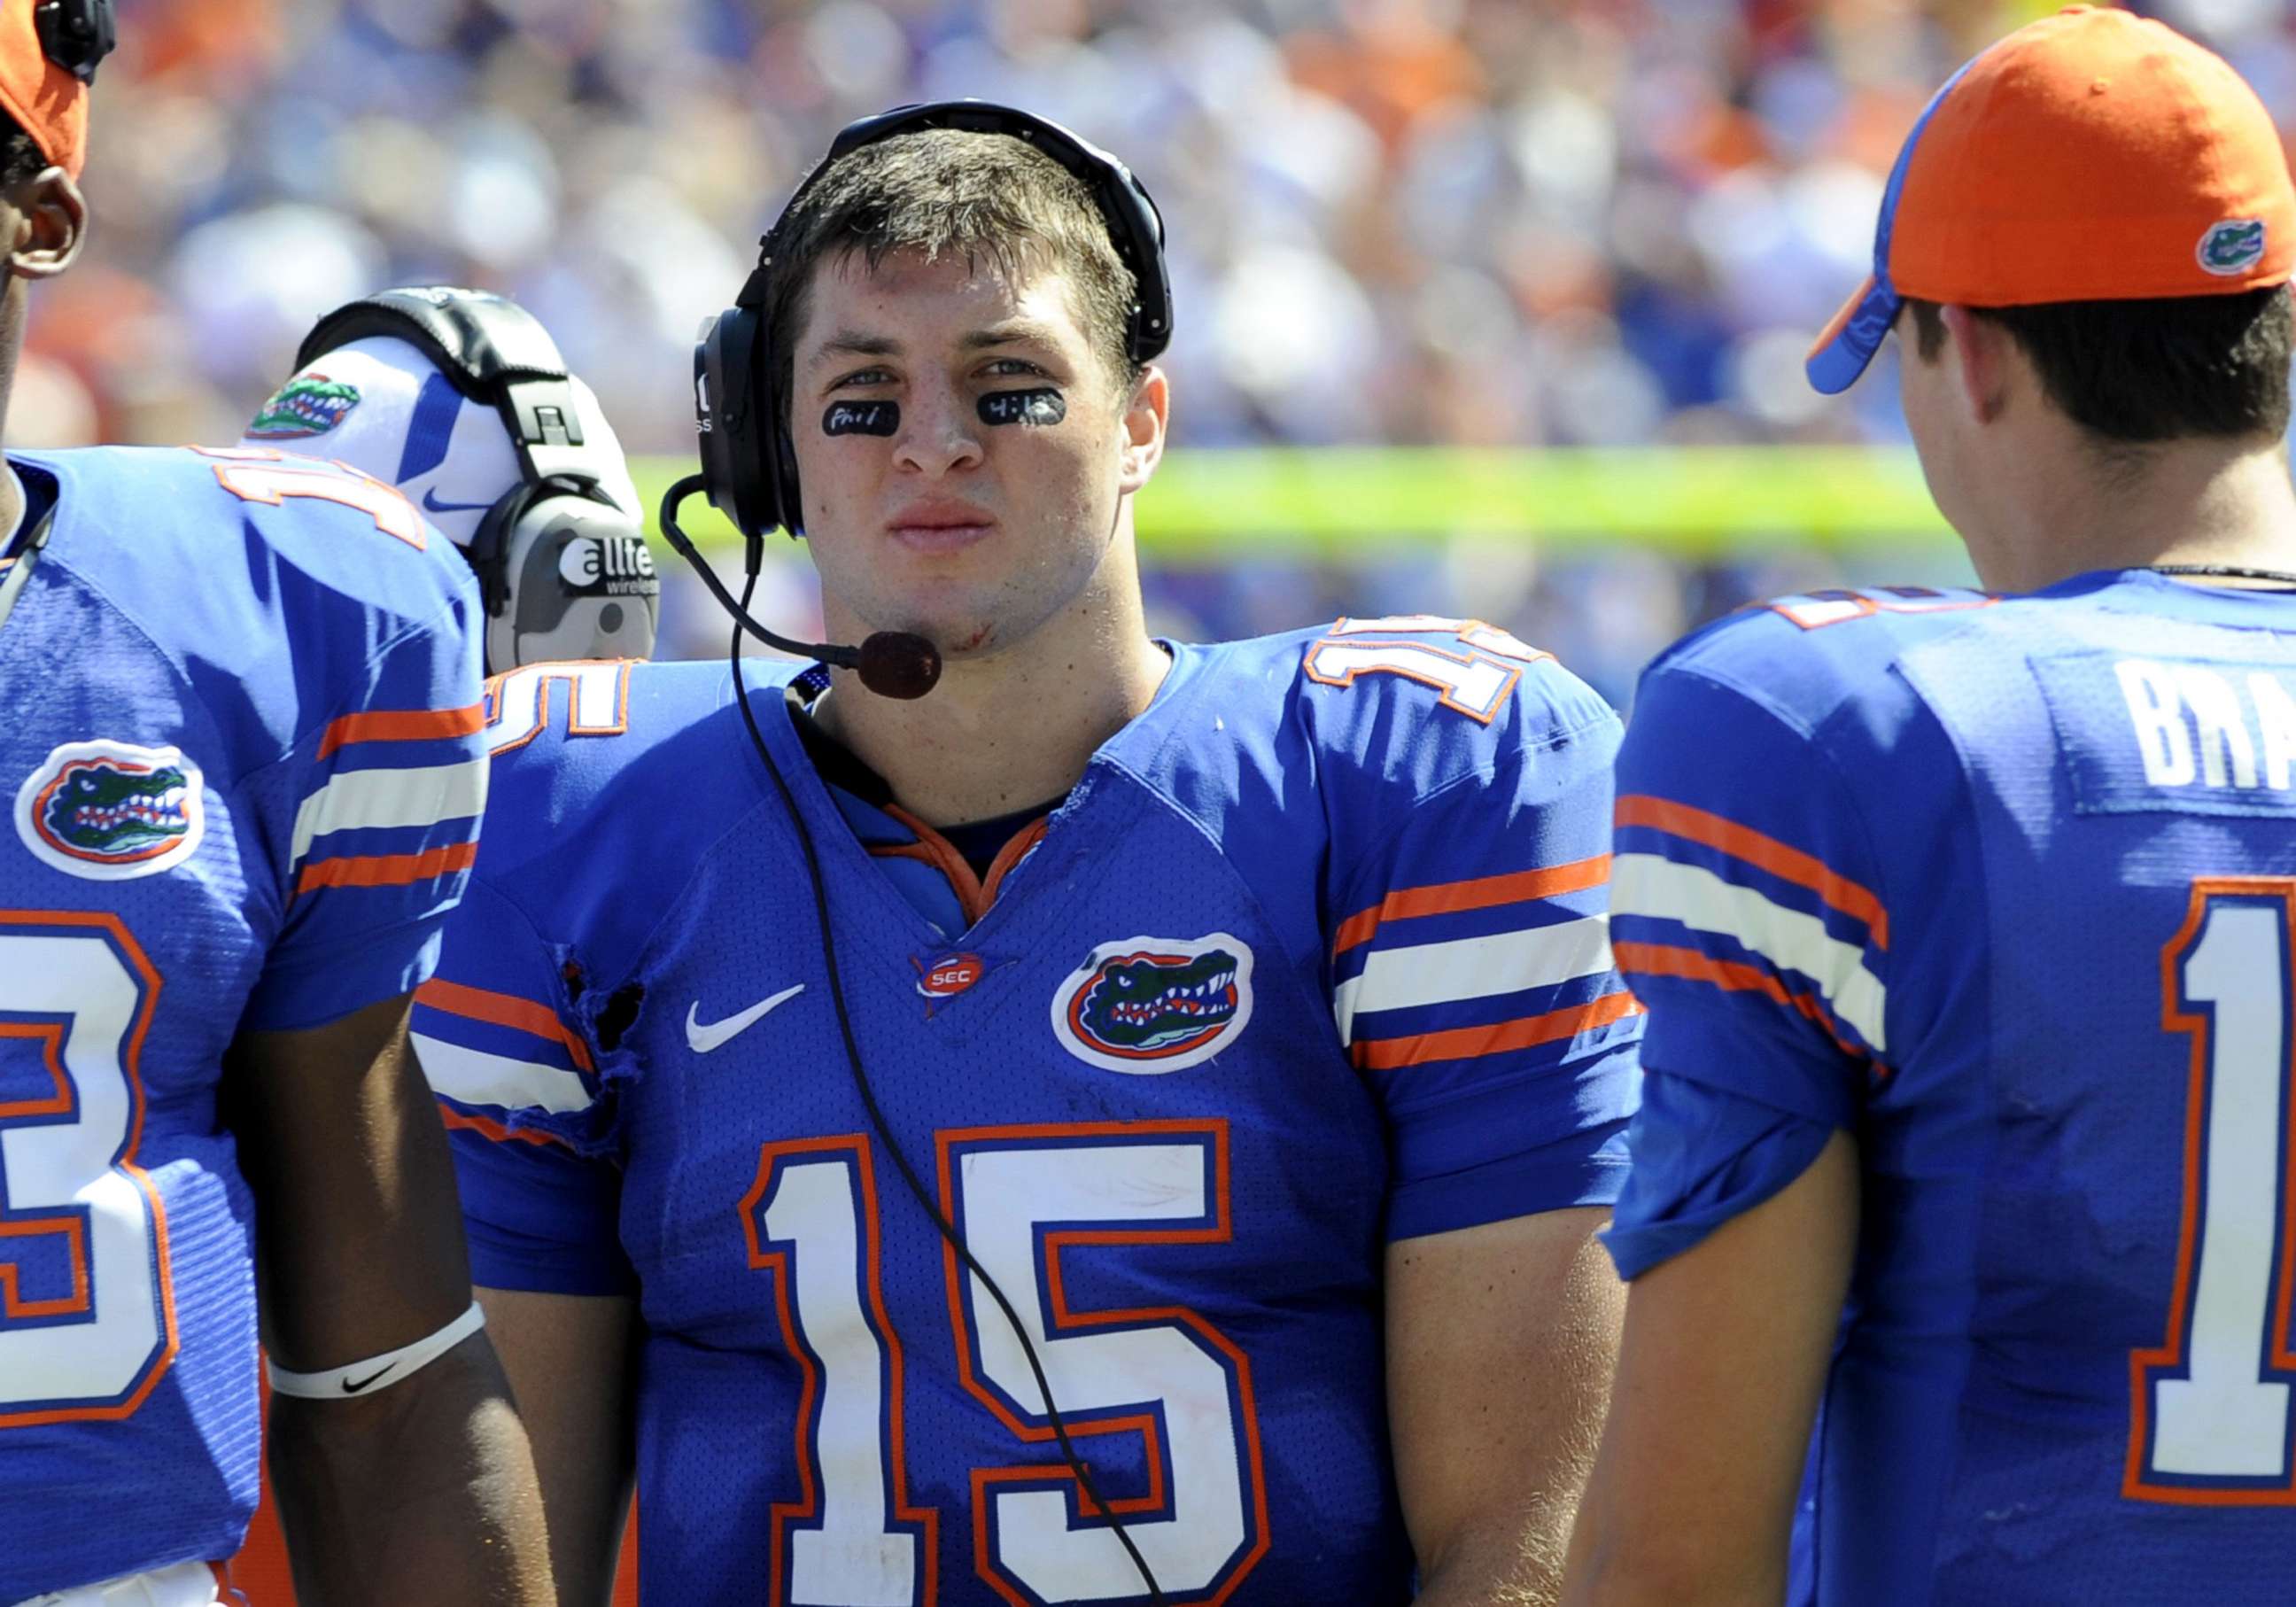 PHOTO: Quarterback Tim Tebow #15 of the Florida Gators checks for a play against the Mississippi Rebels at Ben Hill Griffin Stadium, Sept. 27, 2008, in Gainesville, Florida.